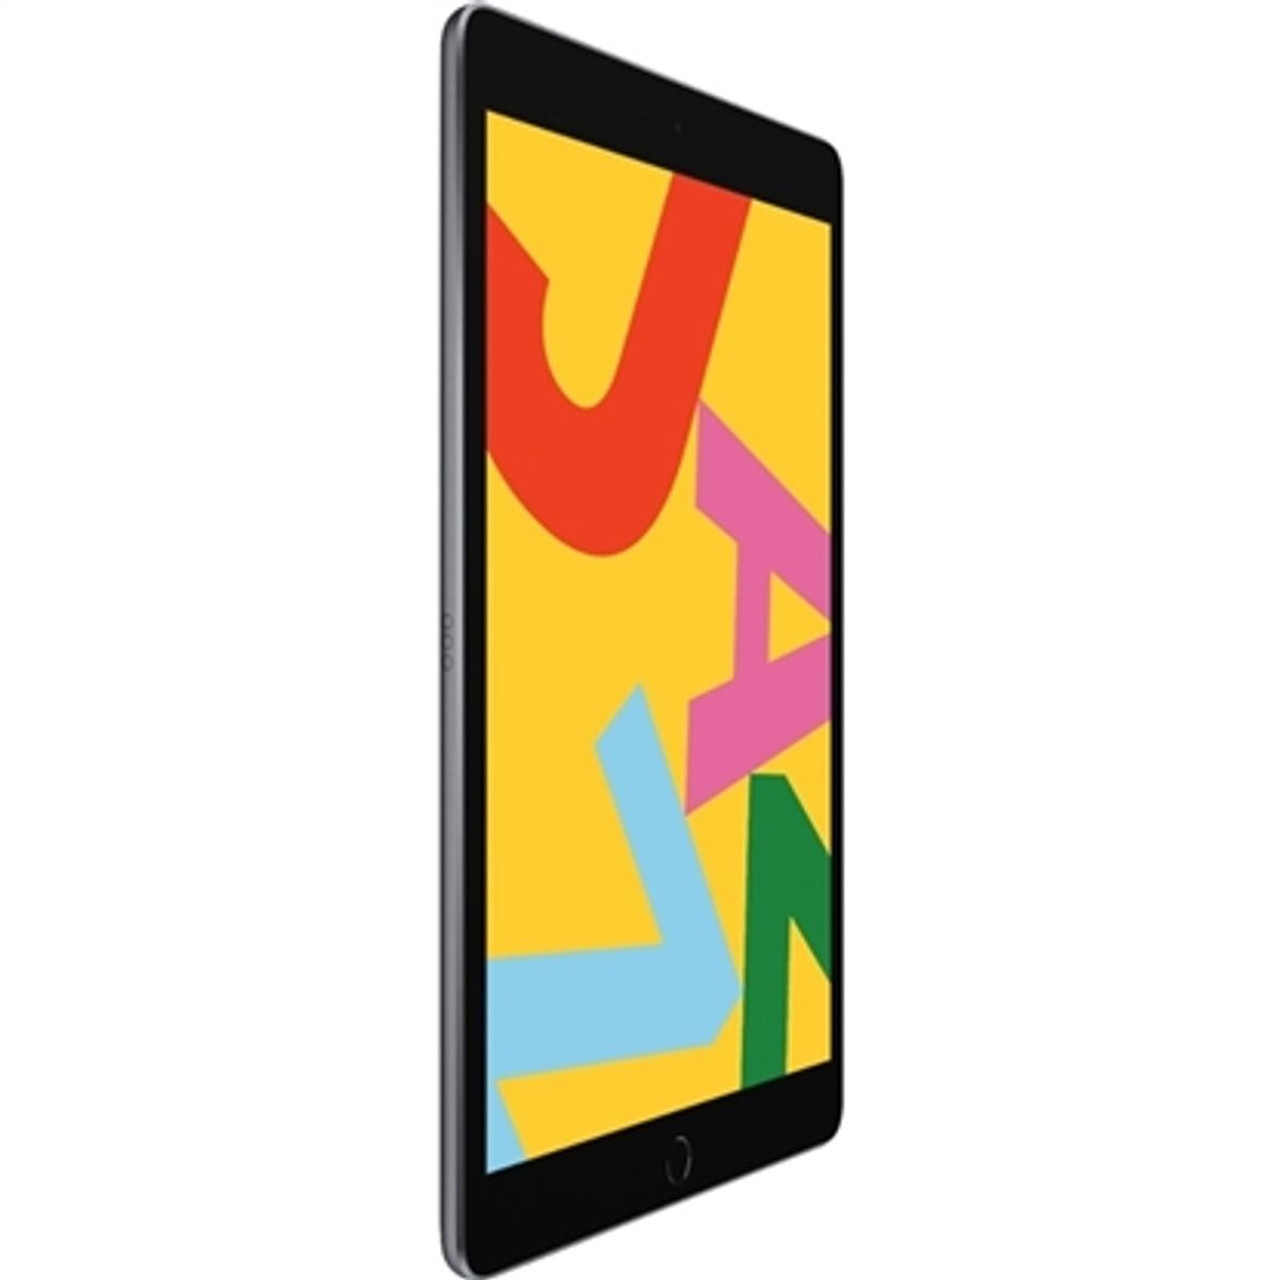 Apple® iPad - Gen 7, 10.2-Inch Touchscreen (2019 Release) product image